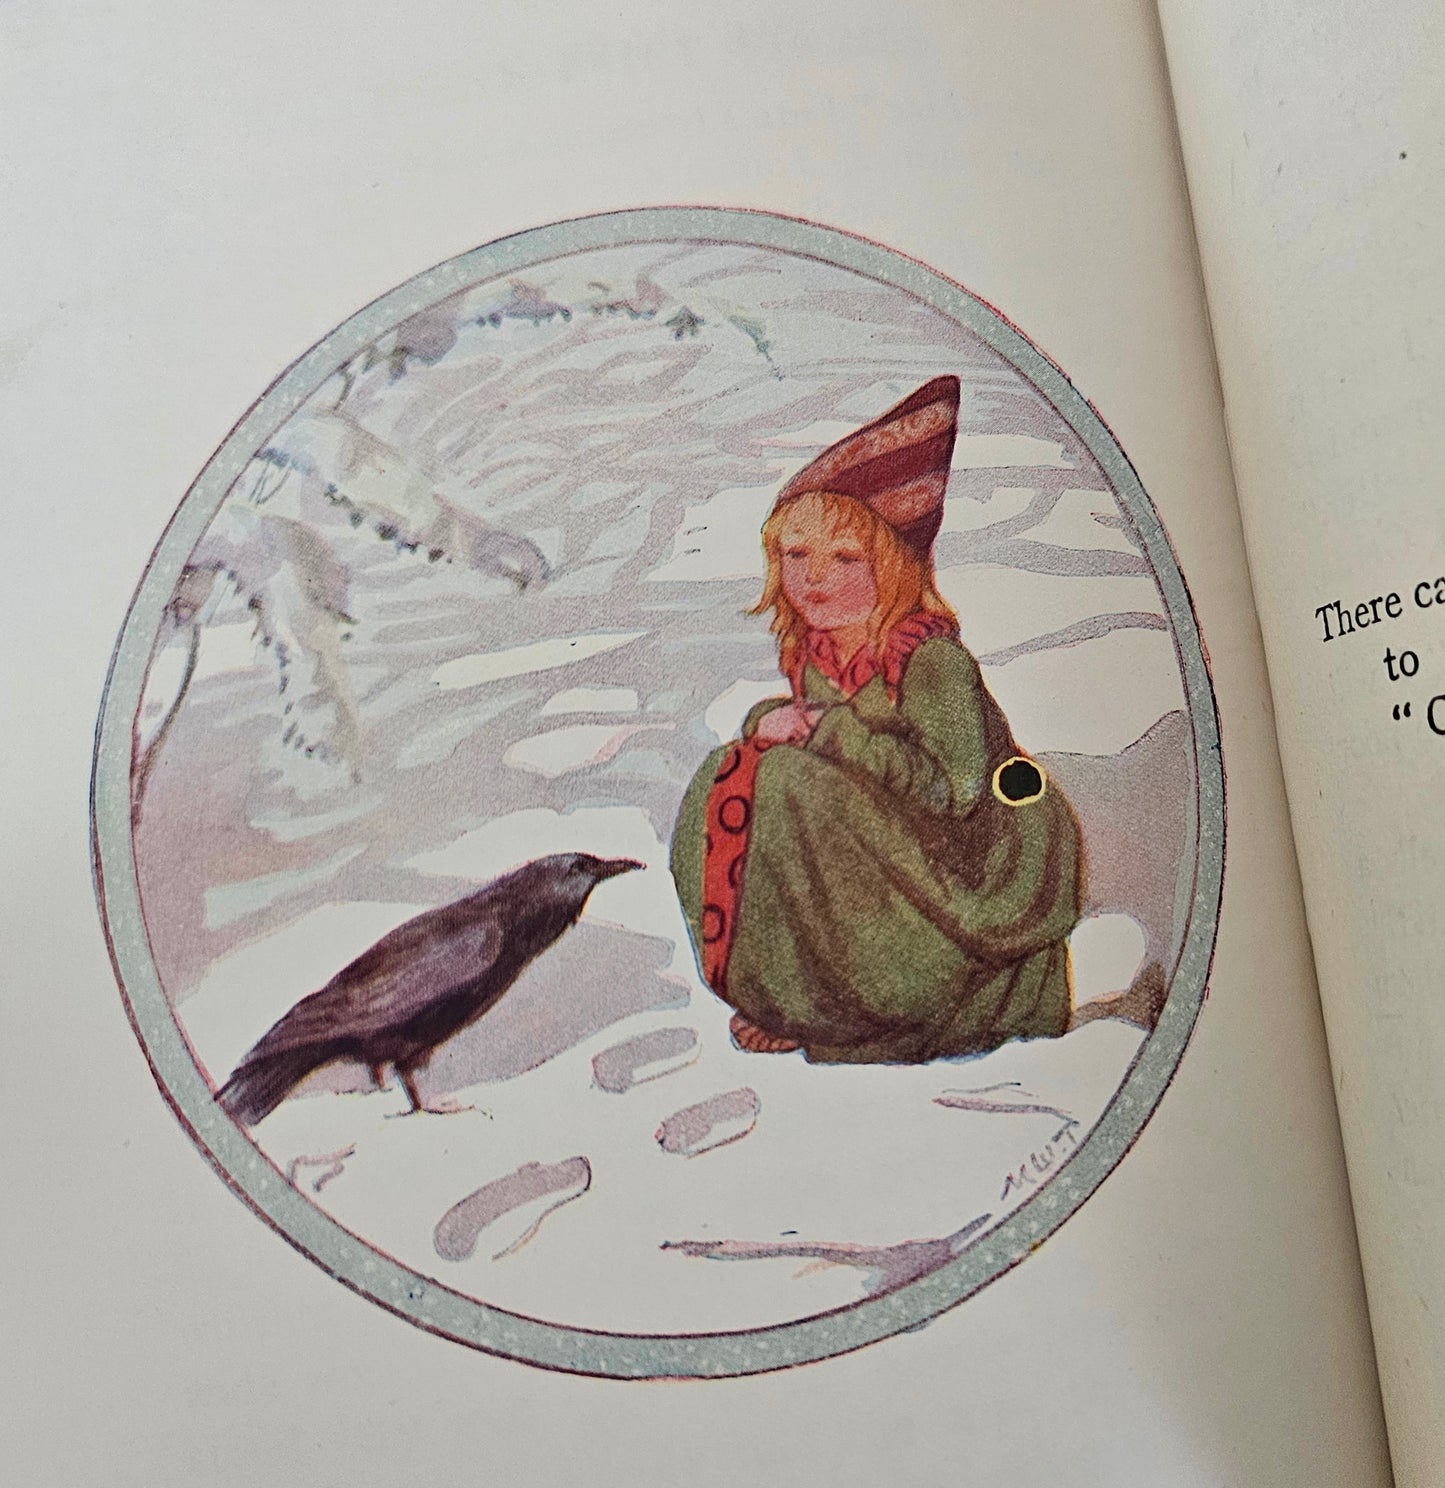 1917 Hans Andersen's Fairy Stories / 48 Colour Plates by Margaret Tarrant / Good Condition / Little Mermaid, Snow Queen, Ugly Duckling etc.